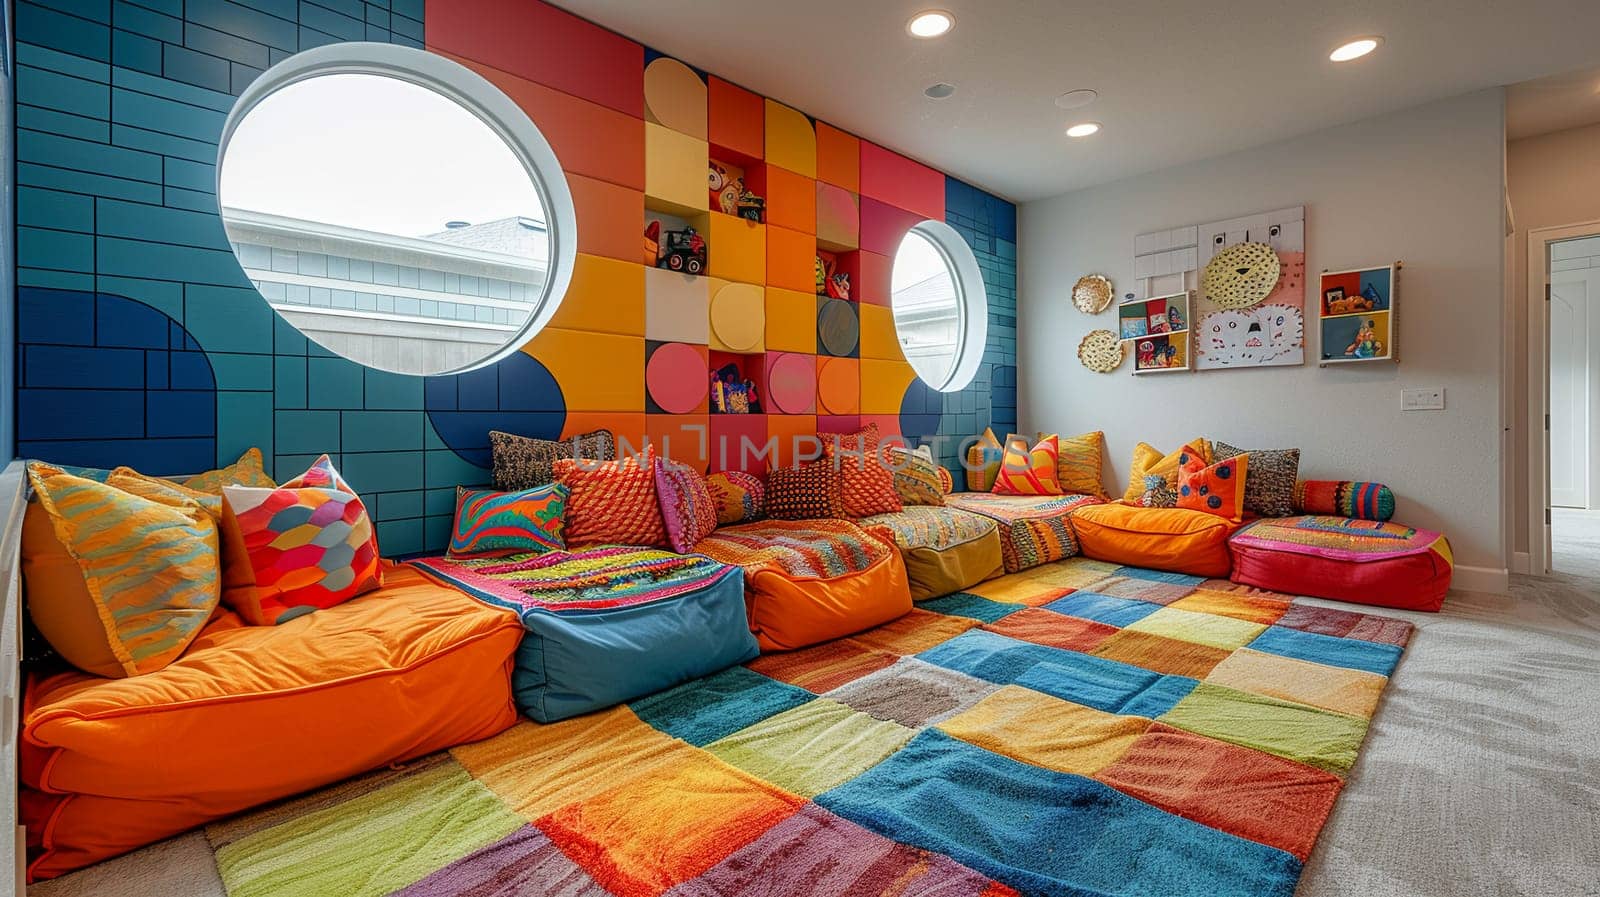 Whimsical childrens playroom with bright colors and imaginative decor by Benzoix